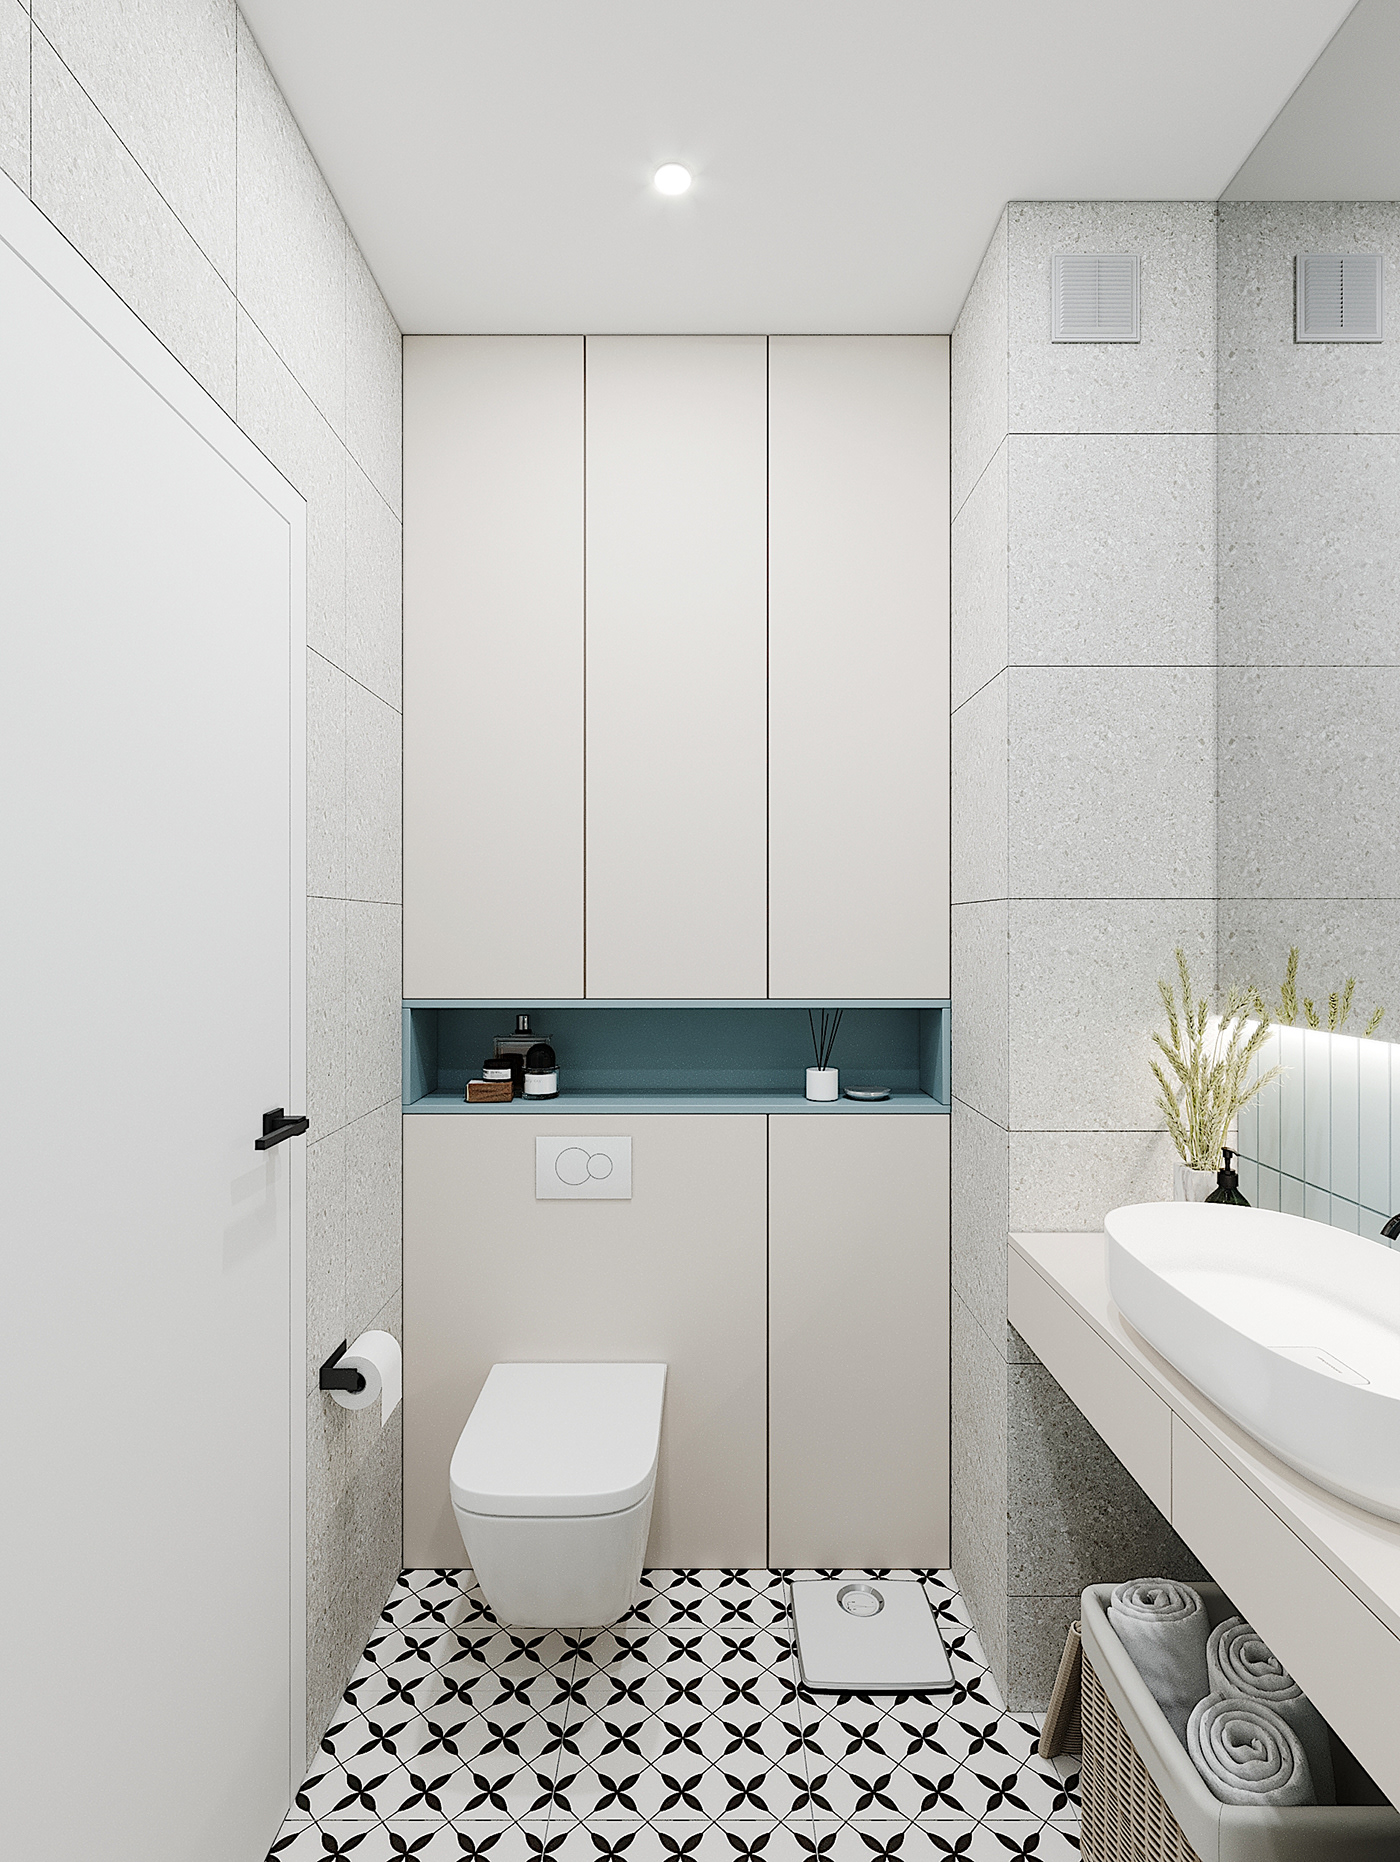 For easy storage of bathroom items, built-in drawers are preferred. Wall-hung toilets are designed to eliminate tub corners, reducing plaque on the floor.